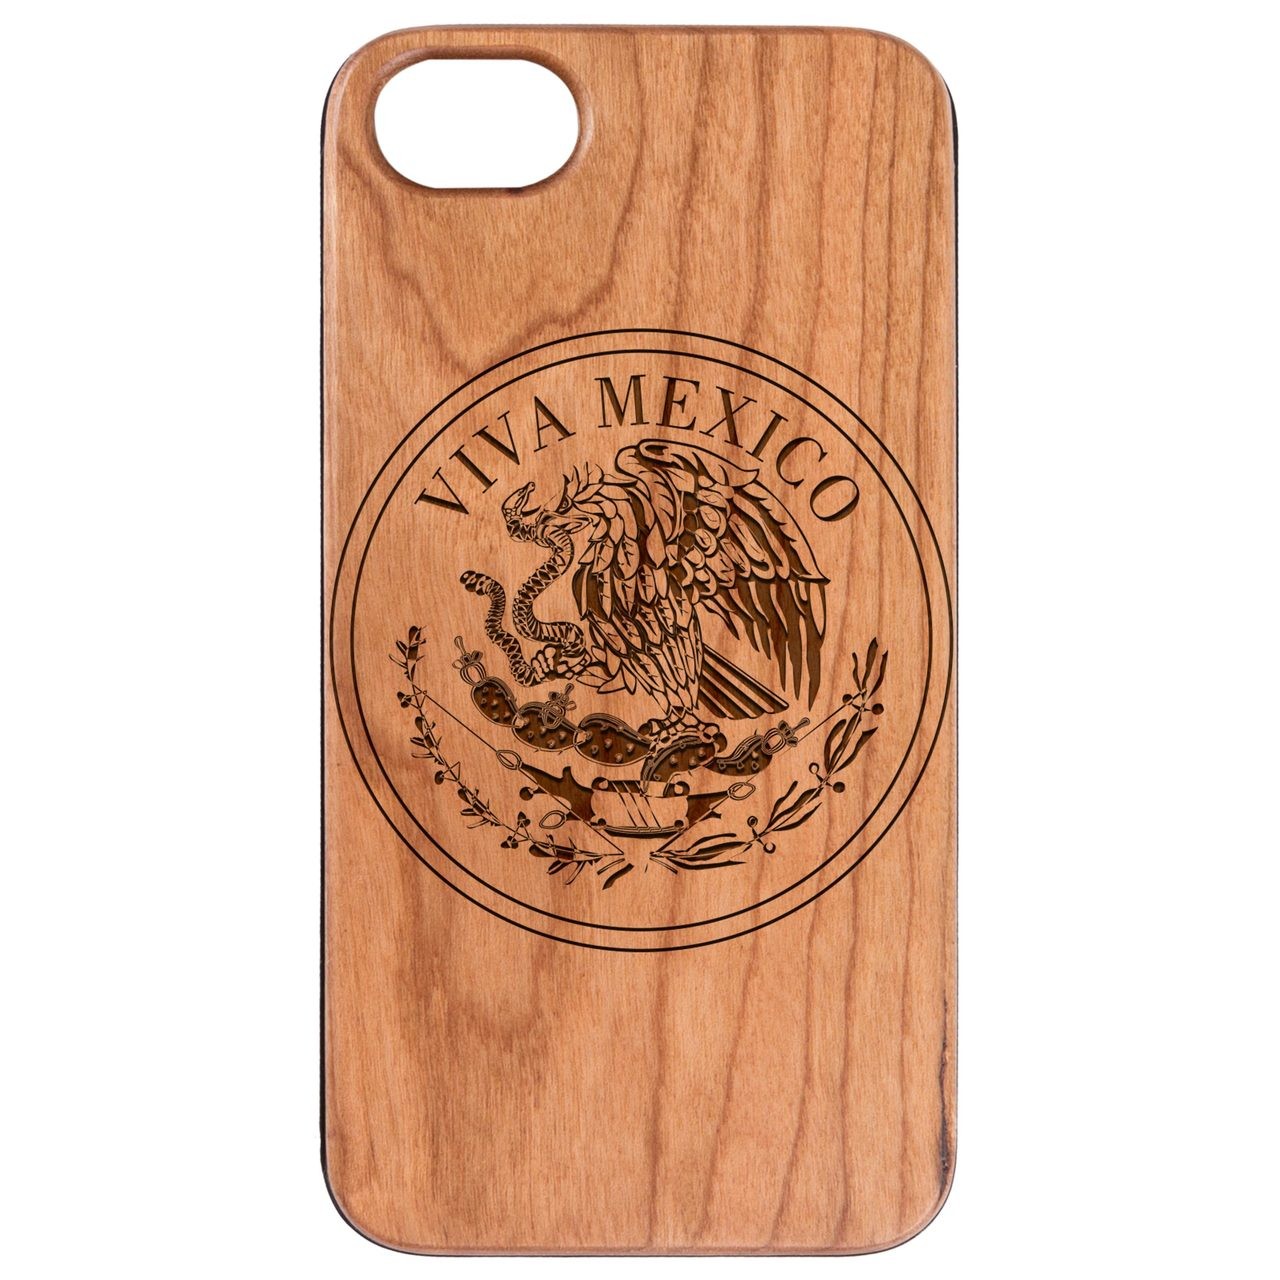  Viva Mexico - Engraved - Wooden Phone Case - IPhone 13 Models